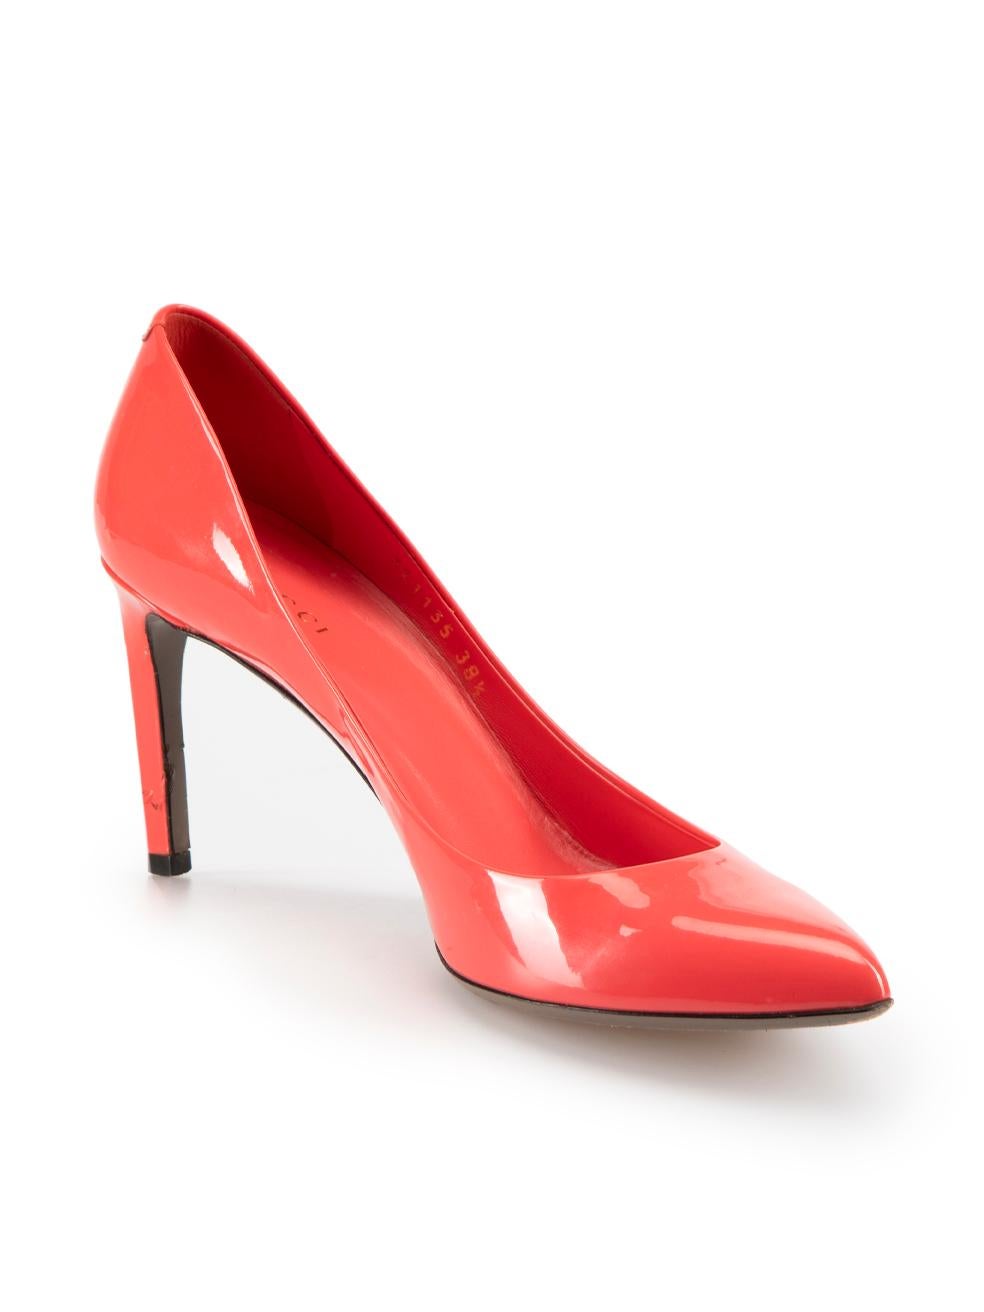 CONDITION is Good. Minor wear to pumps is evident. Light wear to inner and outer soles and small indents to back of heels on this used Gucci designer resale item.



Details


Coral

Patent leather

Slip-on pumps

Point-toe

High-heeled



 

Made